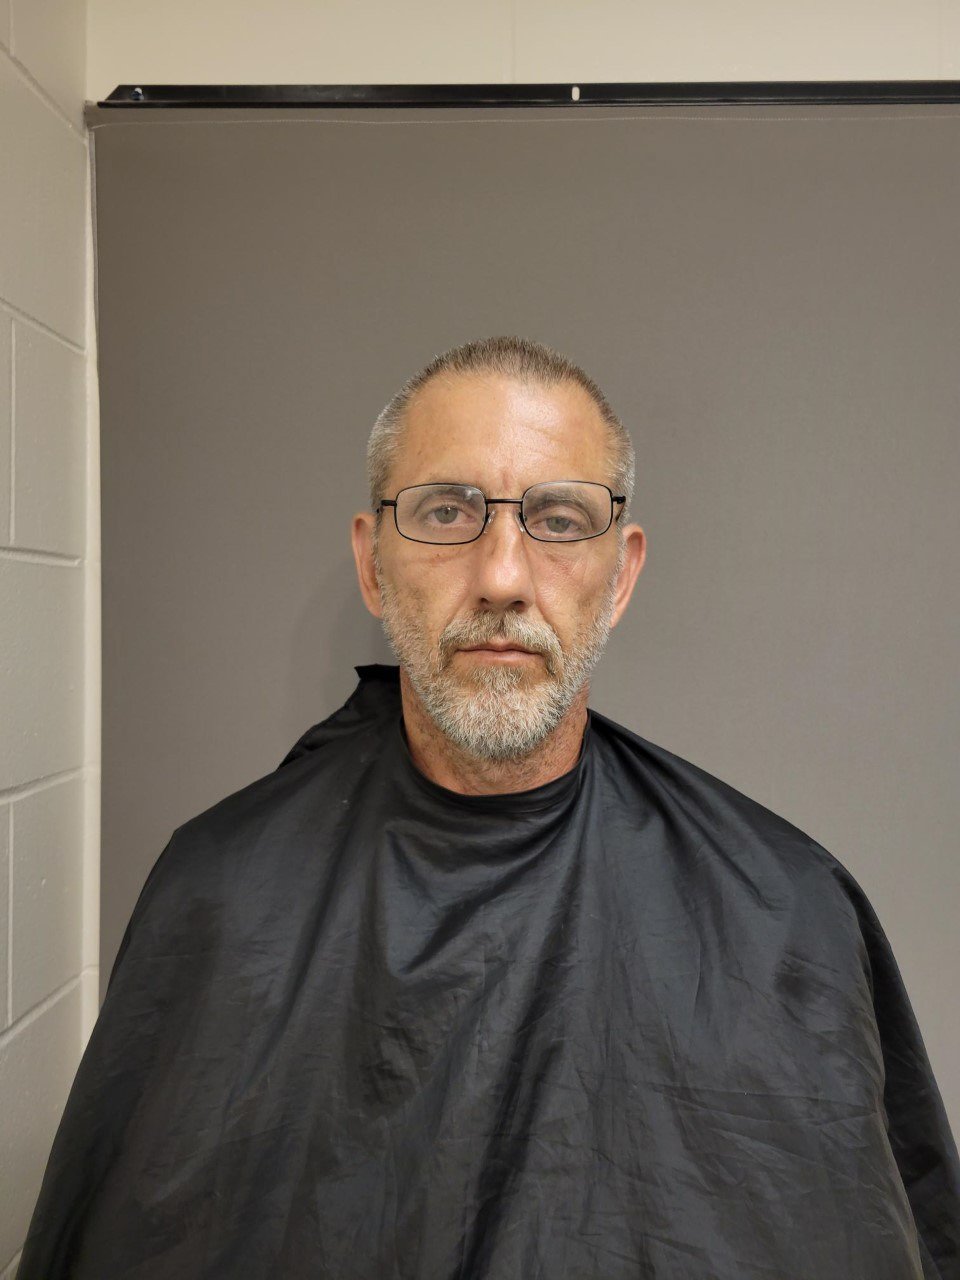 A Boone County prosecutor has charged Thomas Kazimir with second-degree burglary, unlawful possession of a firearm and possession of a controlled substance.